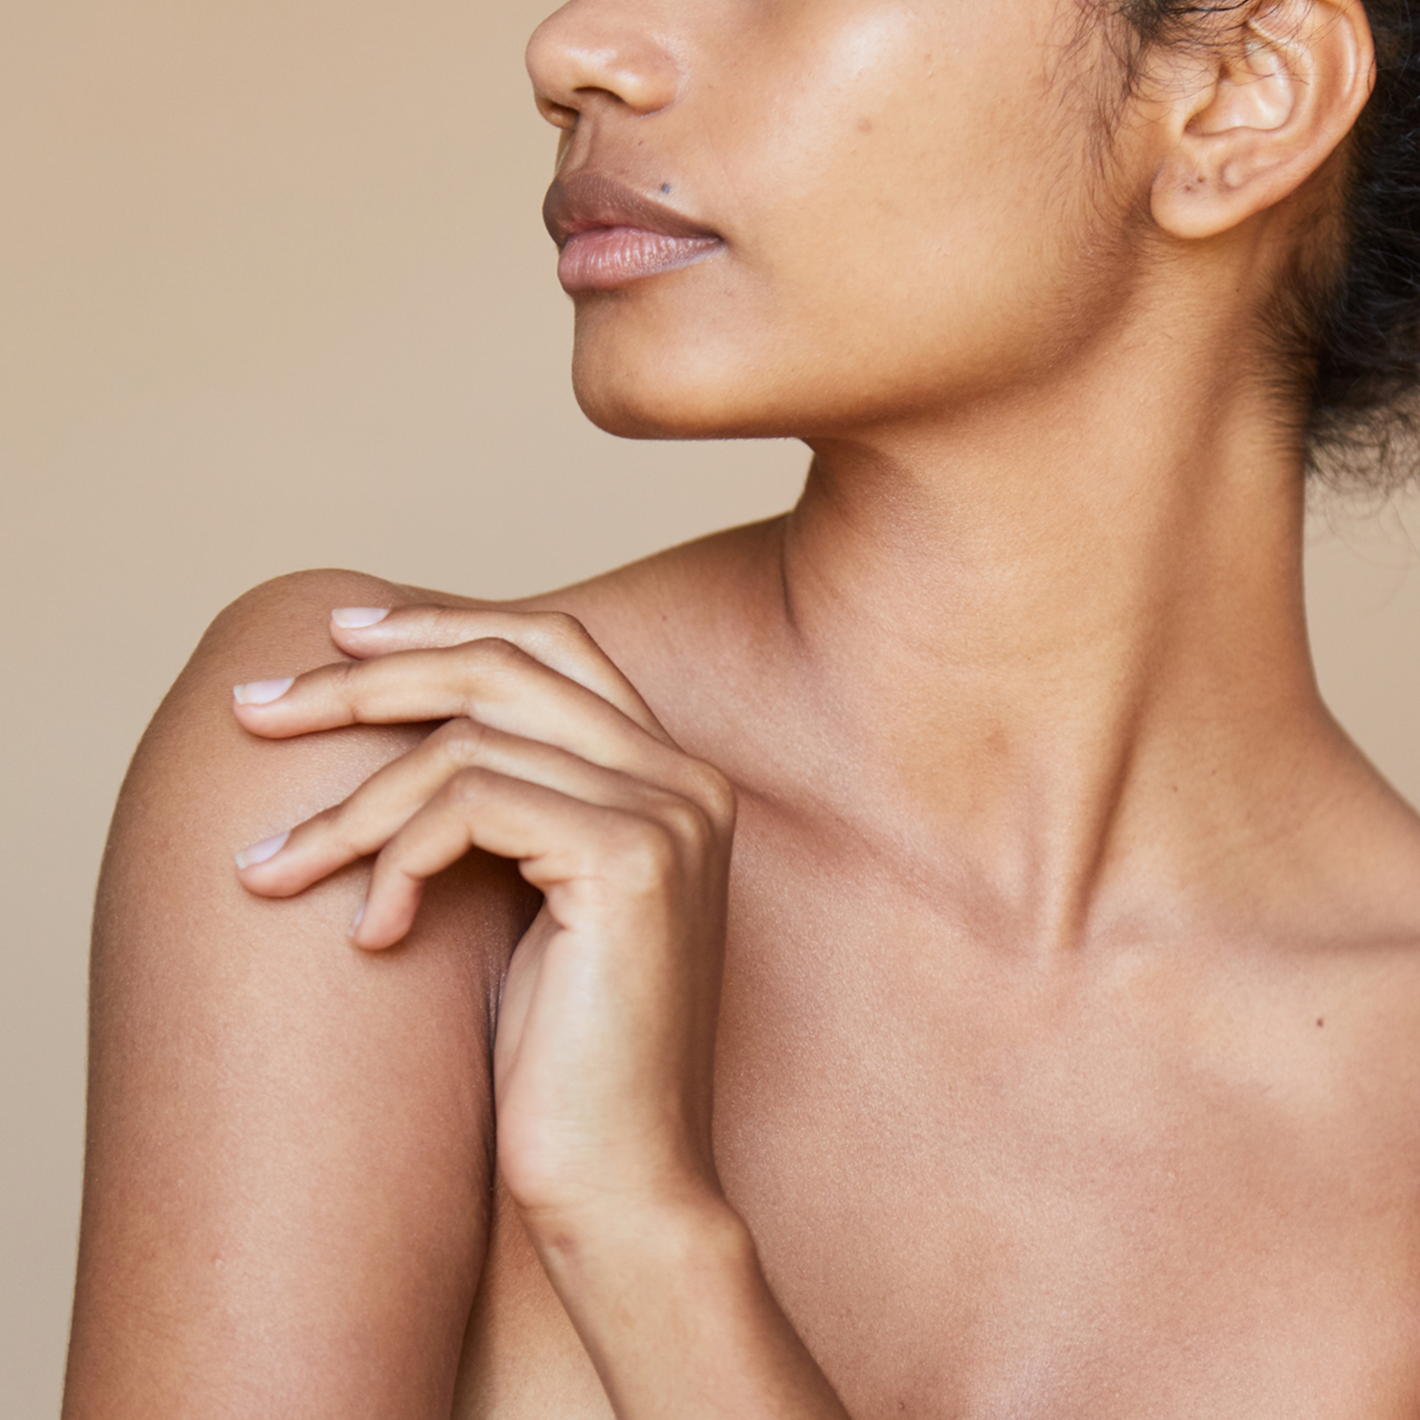 Woman showing her bare skin on her face and upper shoulders.